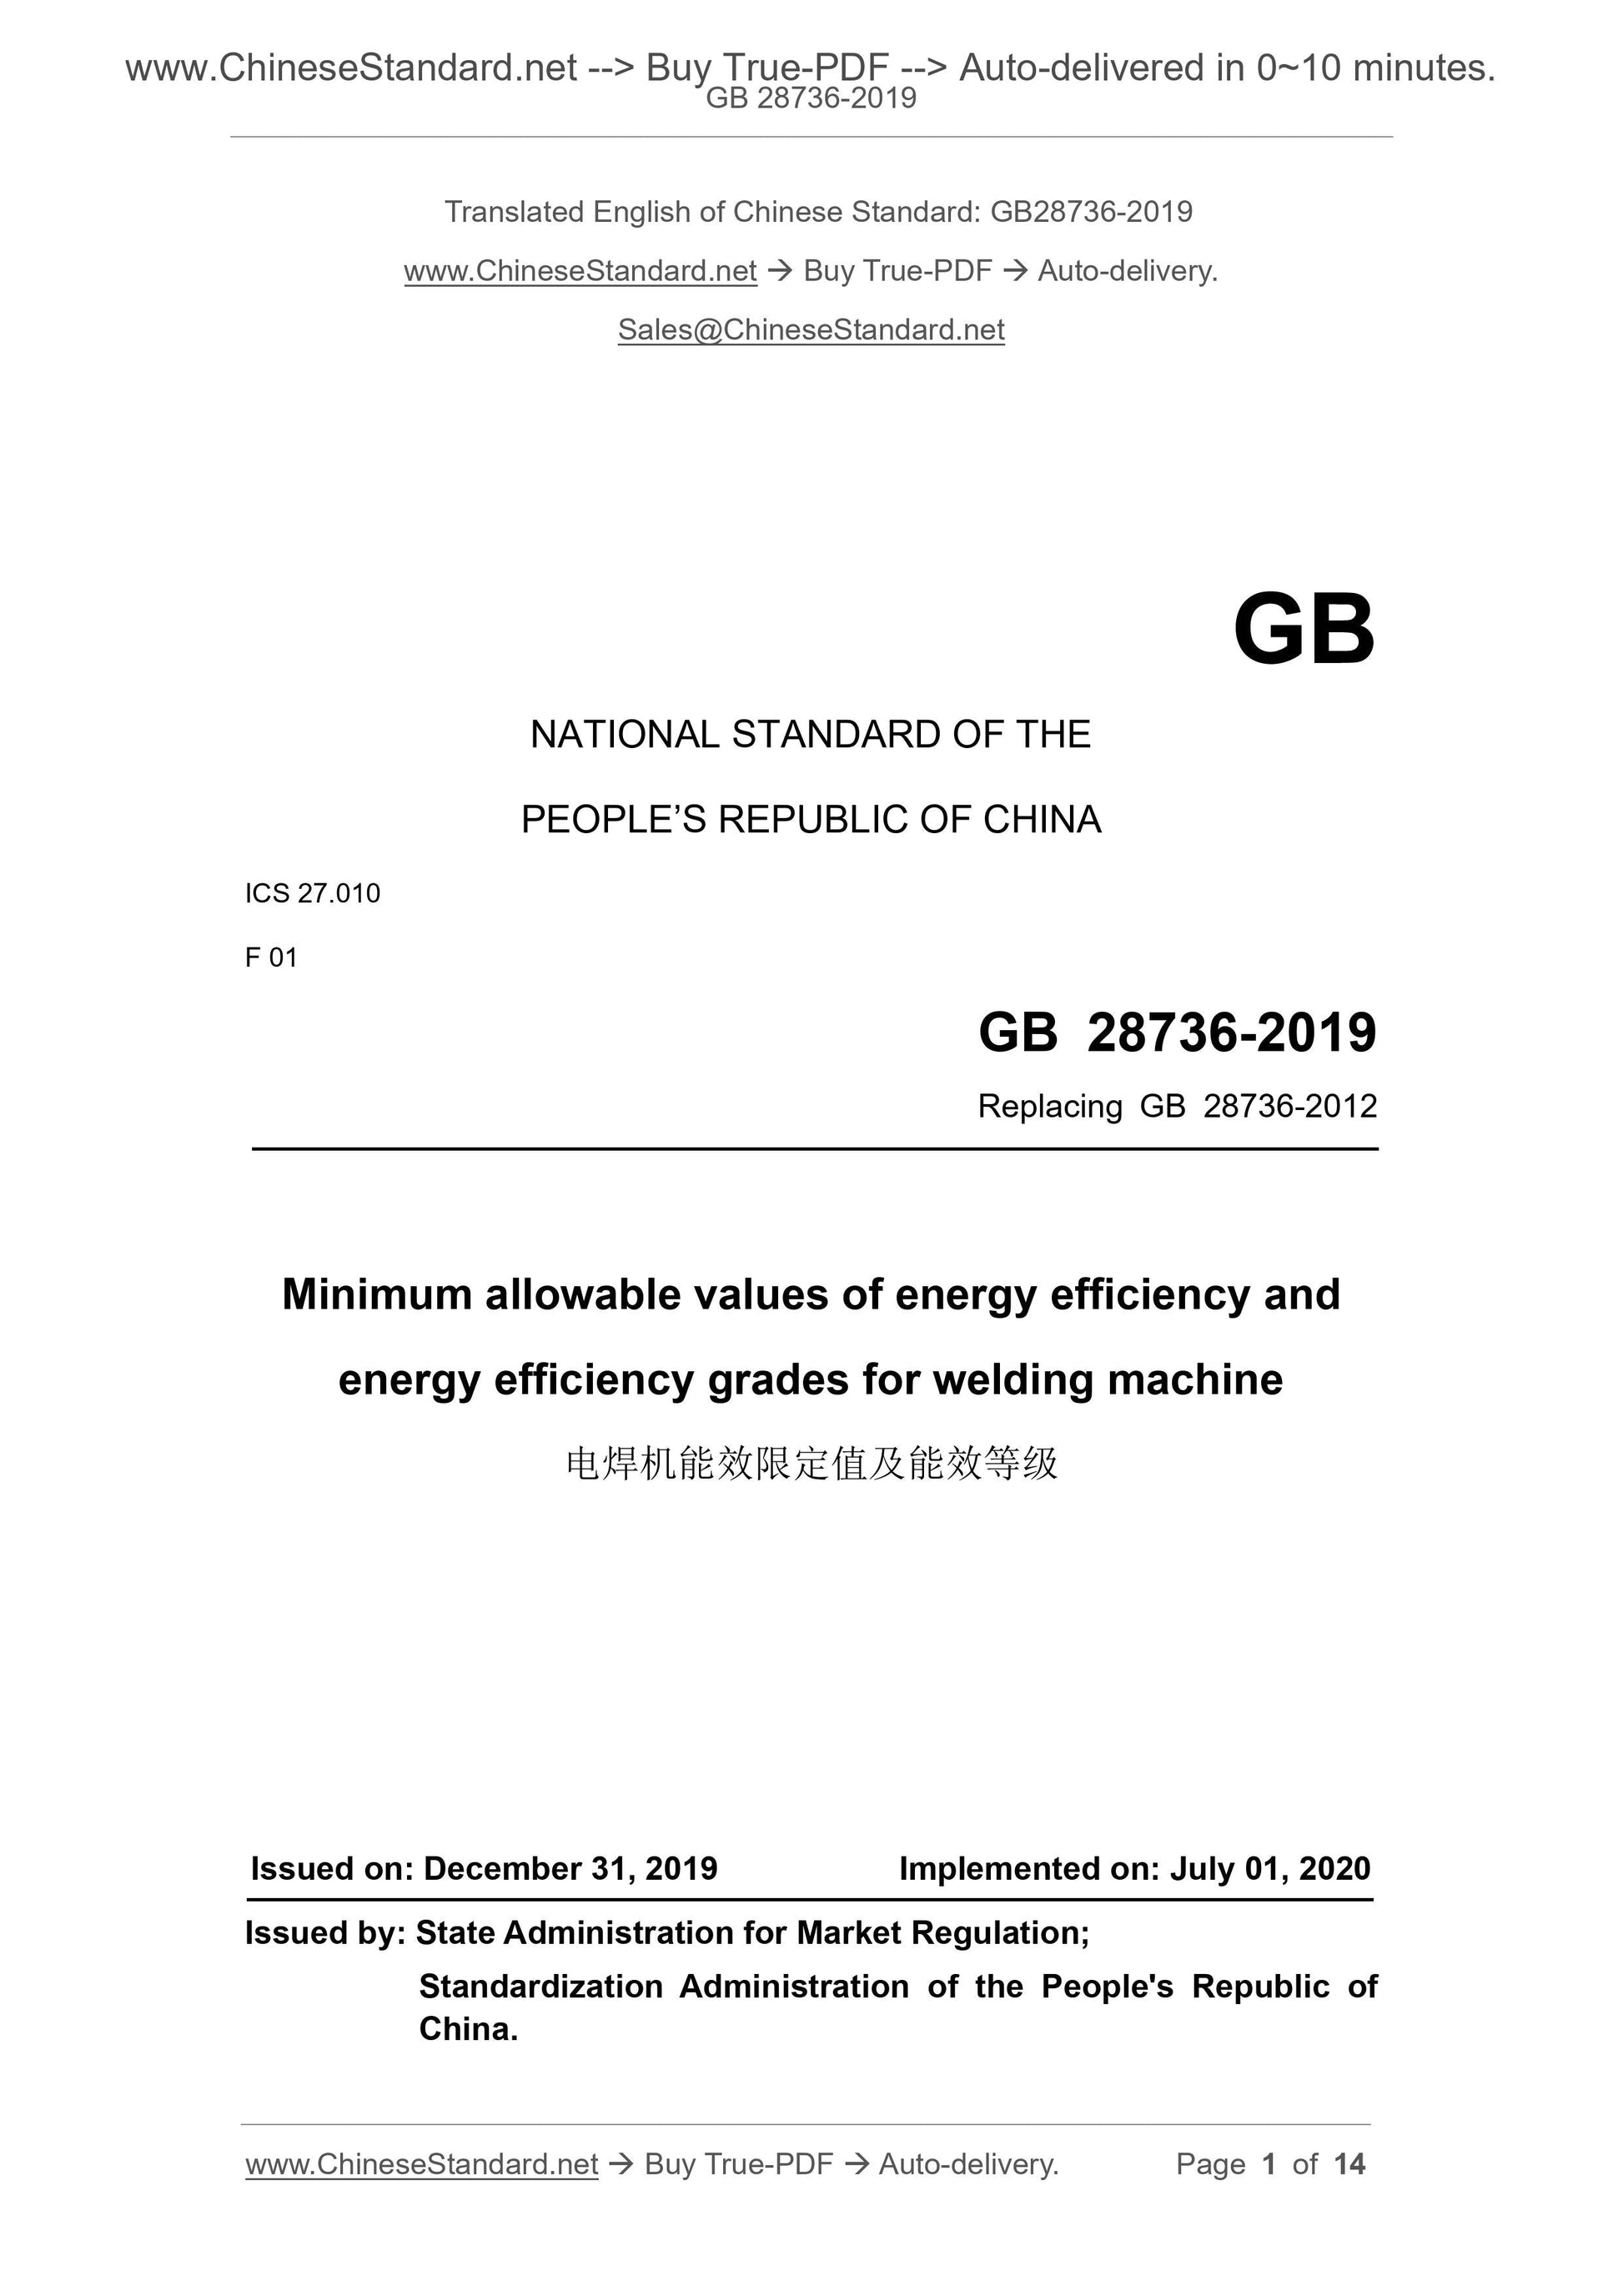 GB 28736-2019 Page 1